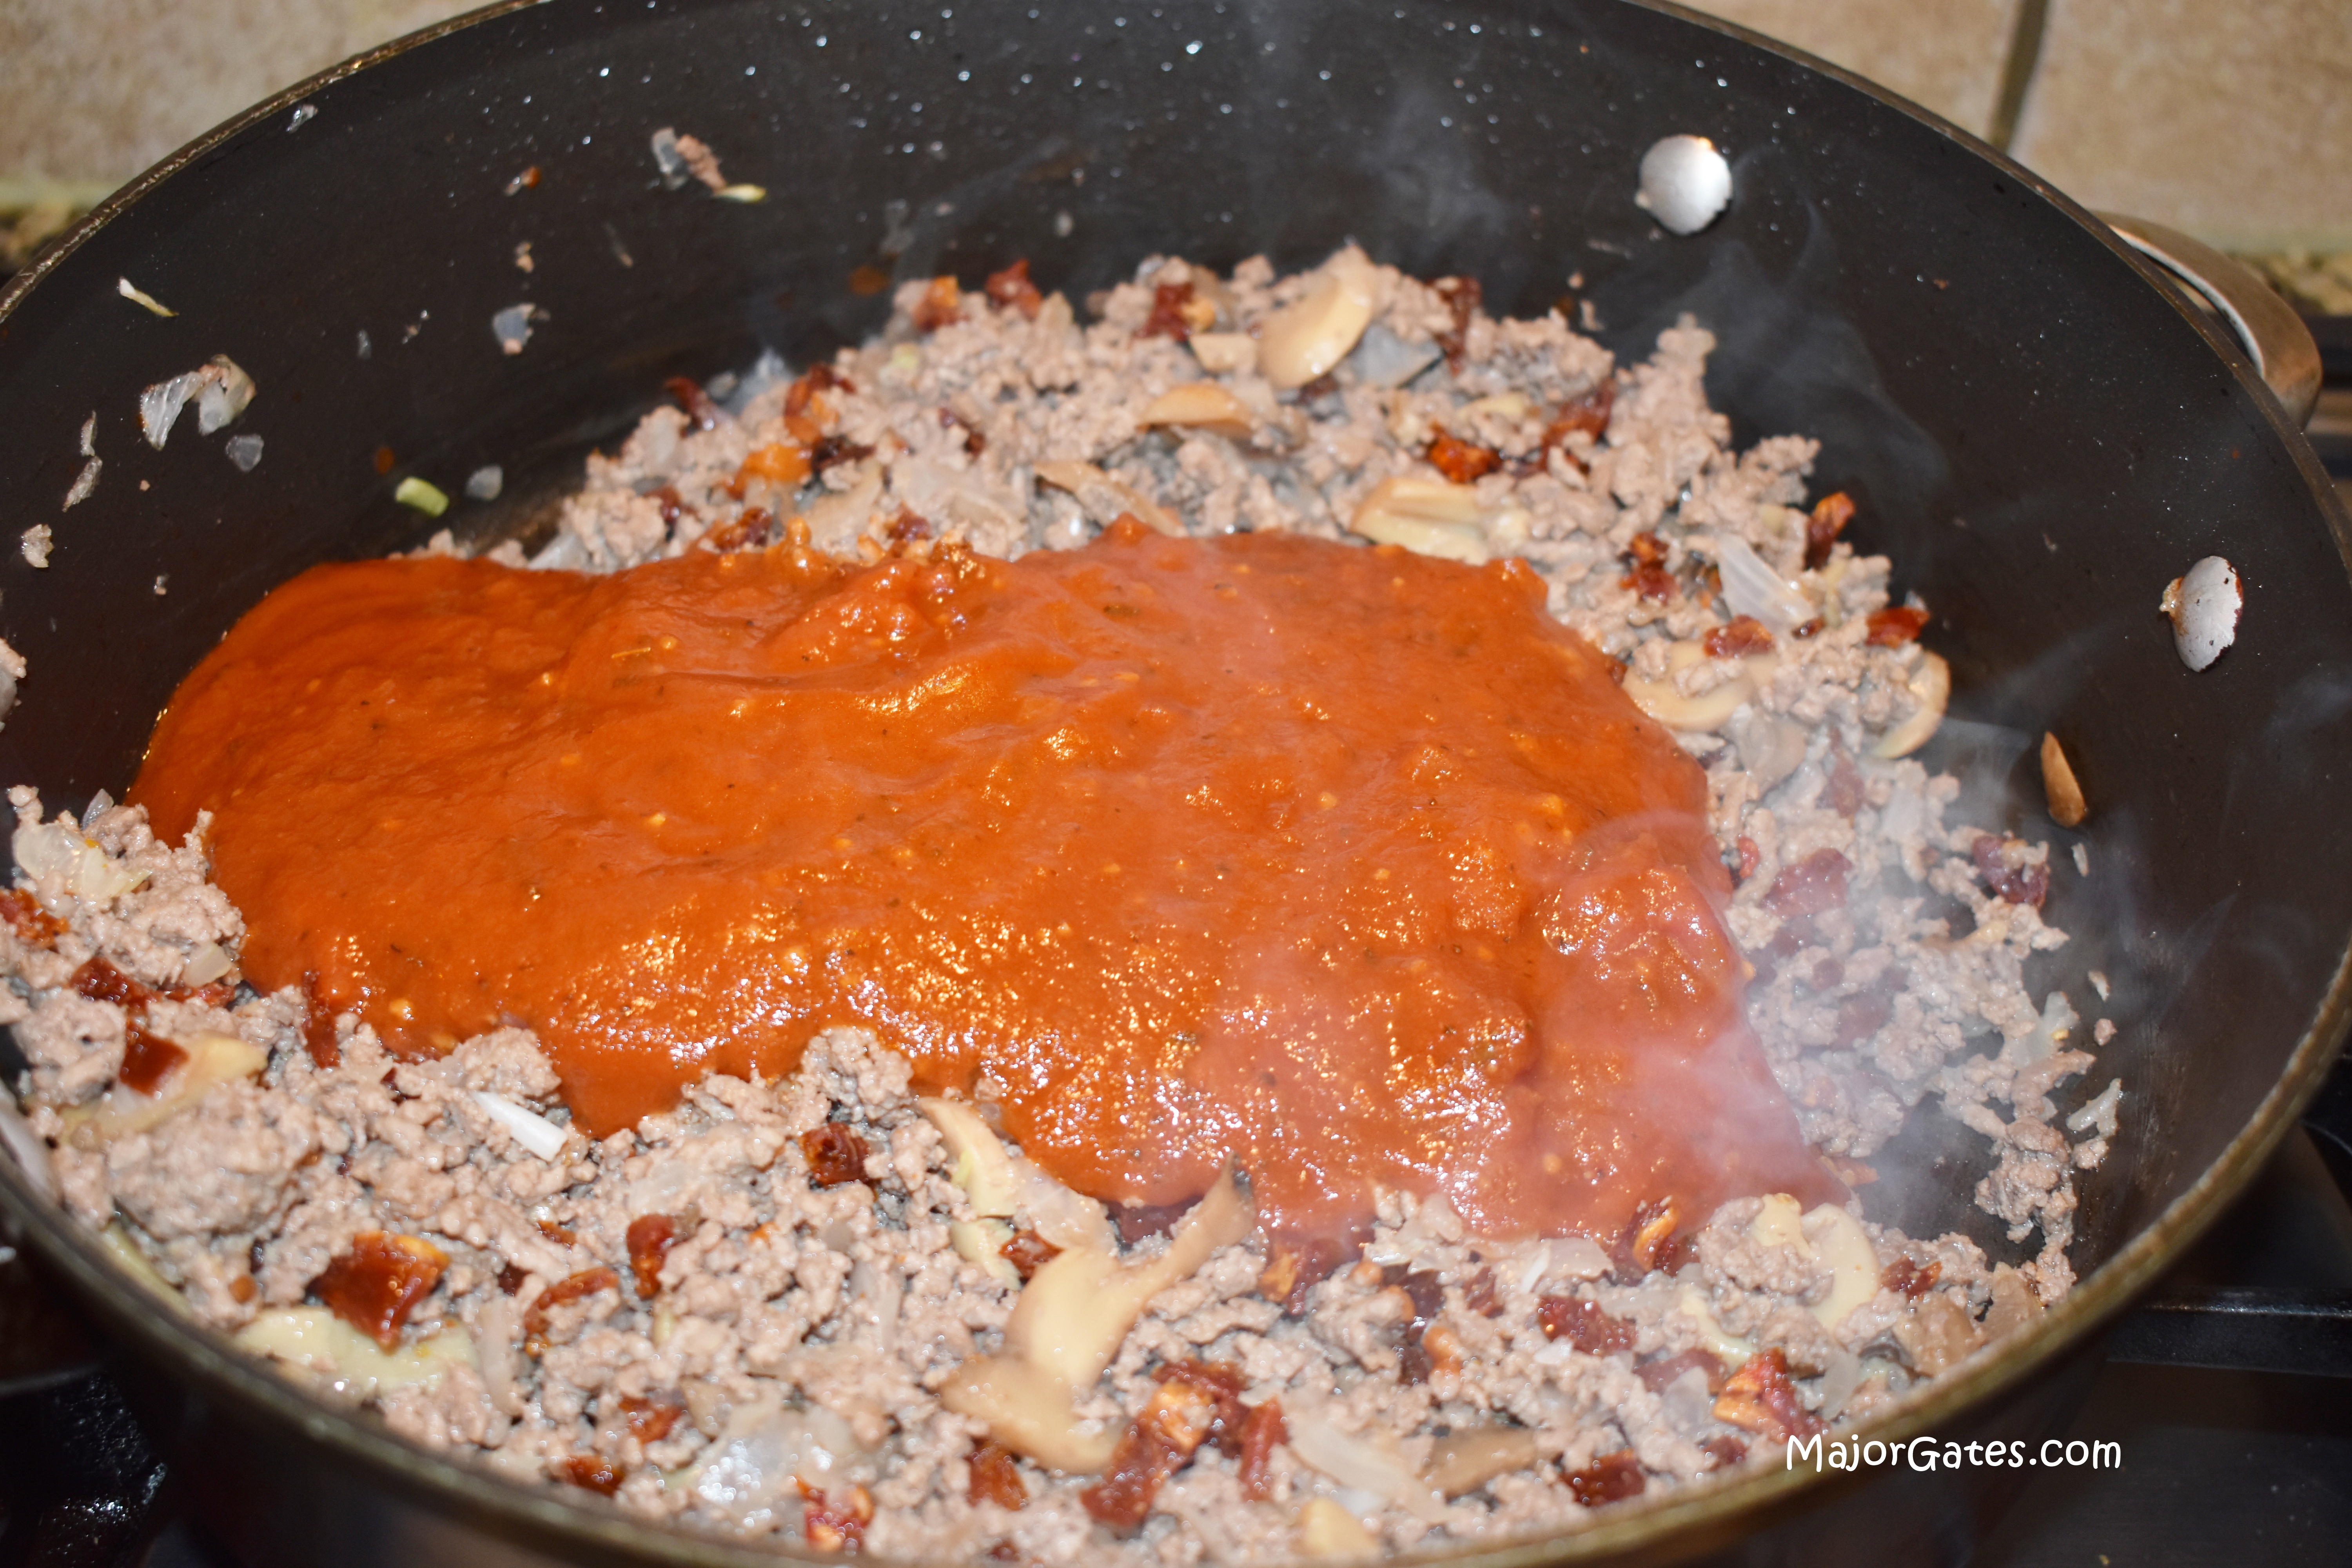 Adding the pasta sauce to the meat mixture